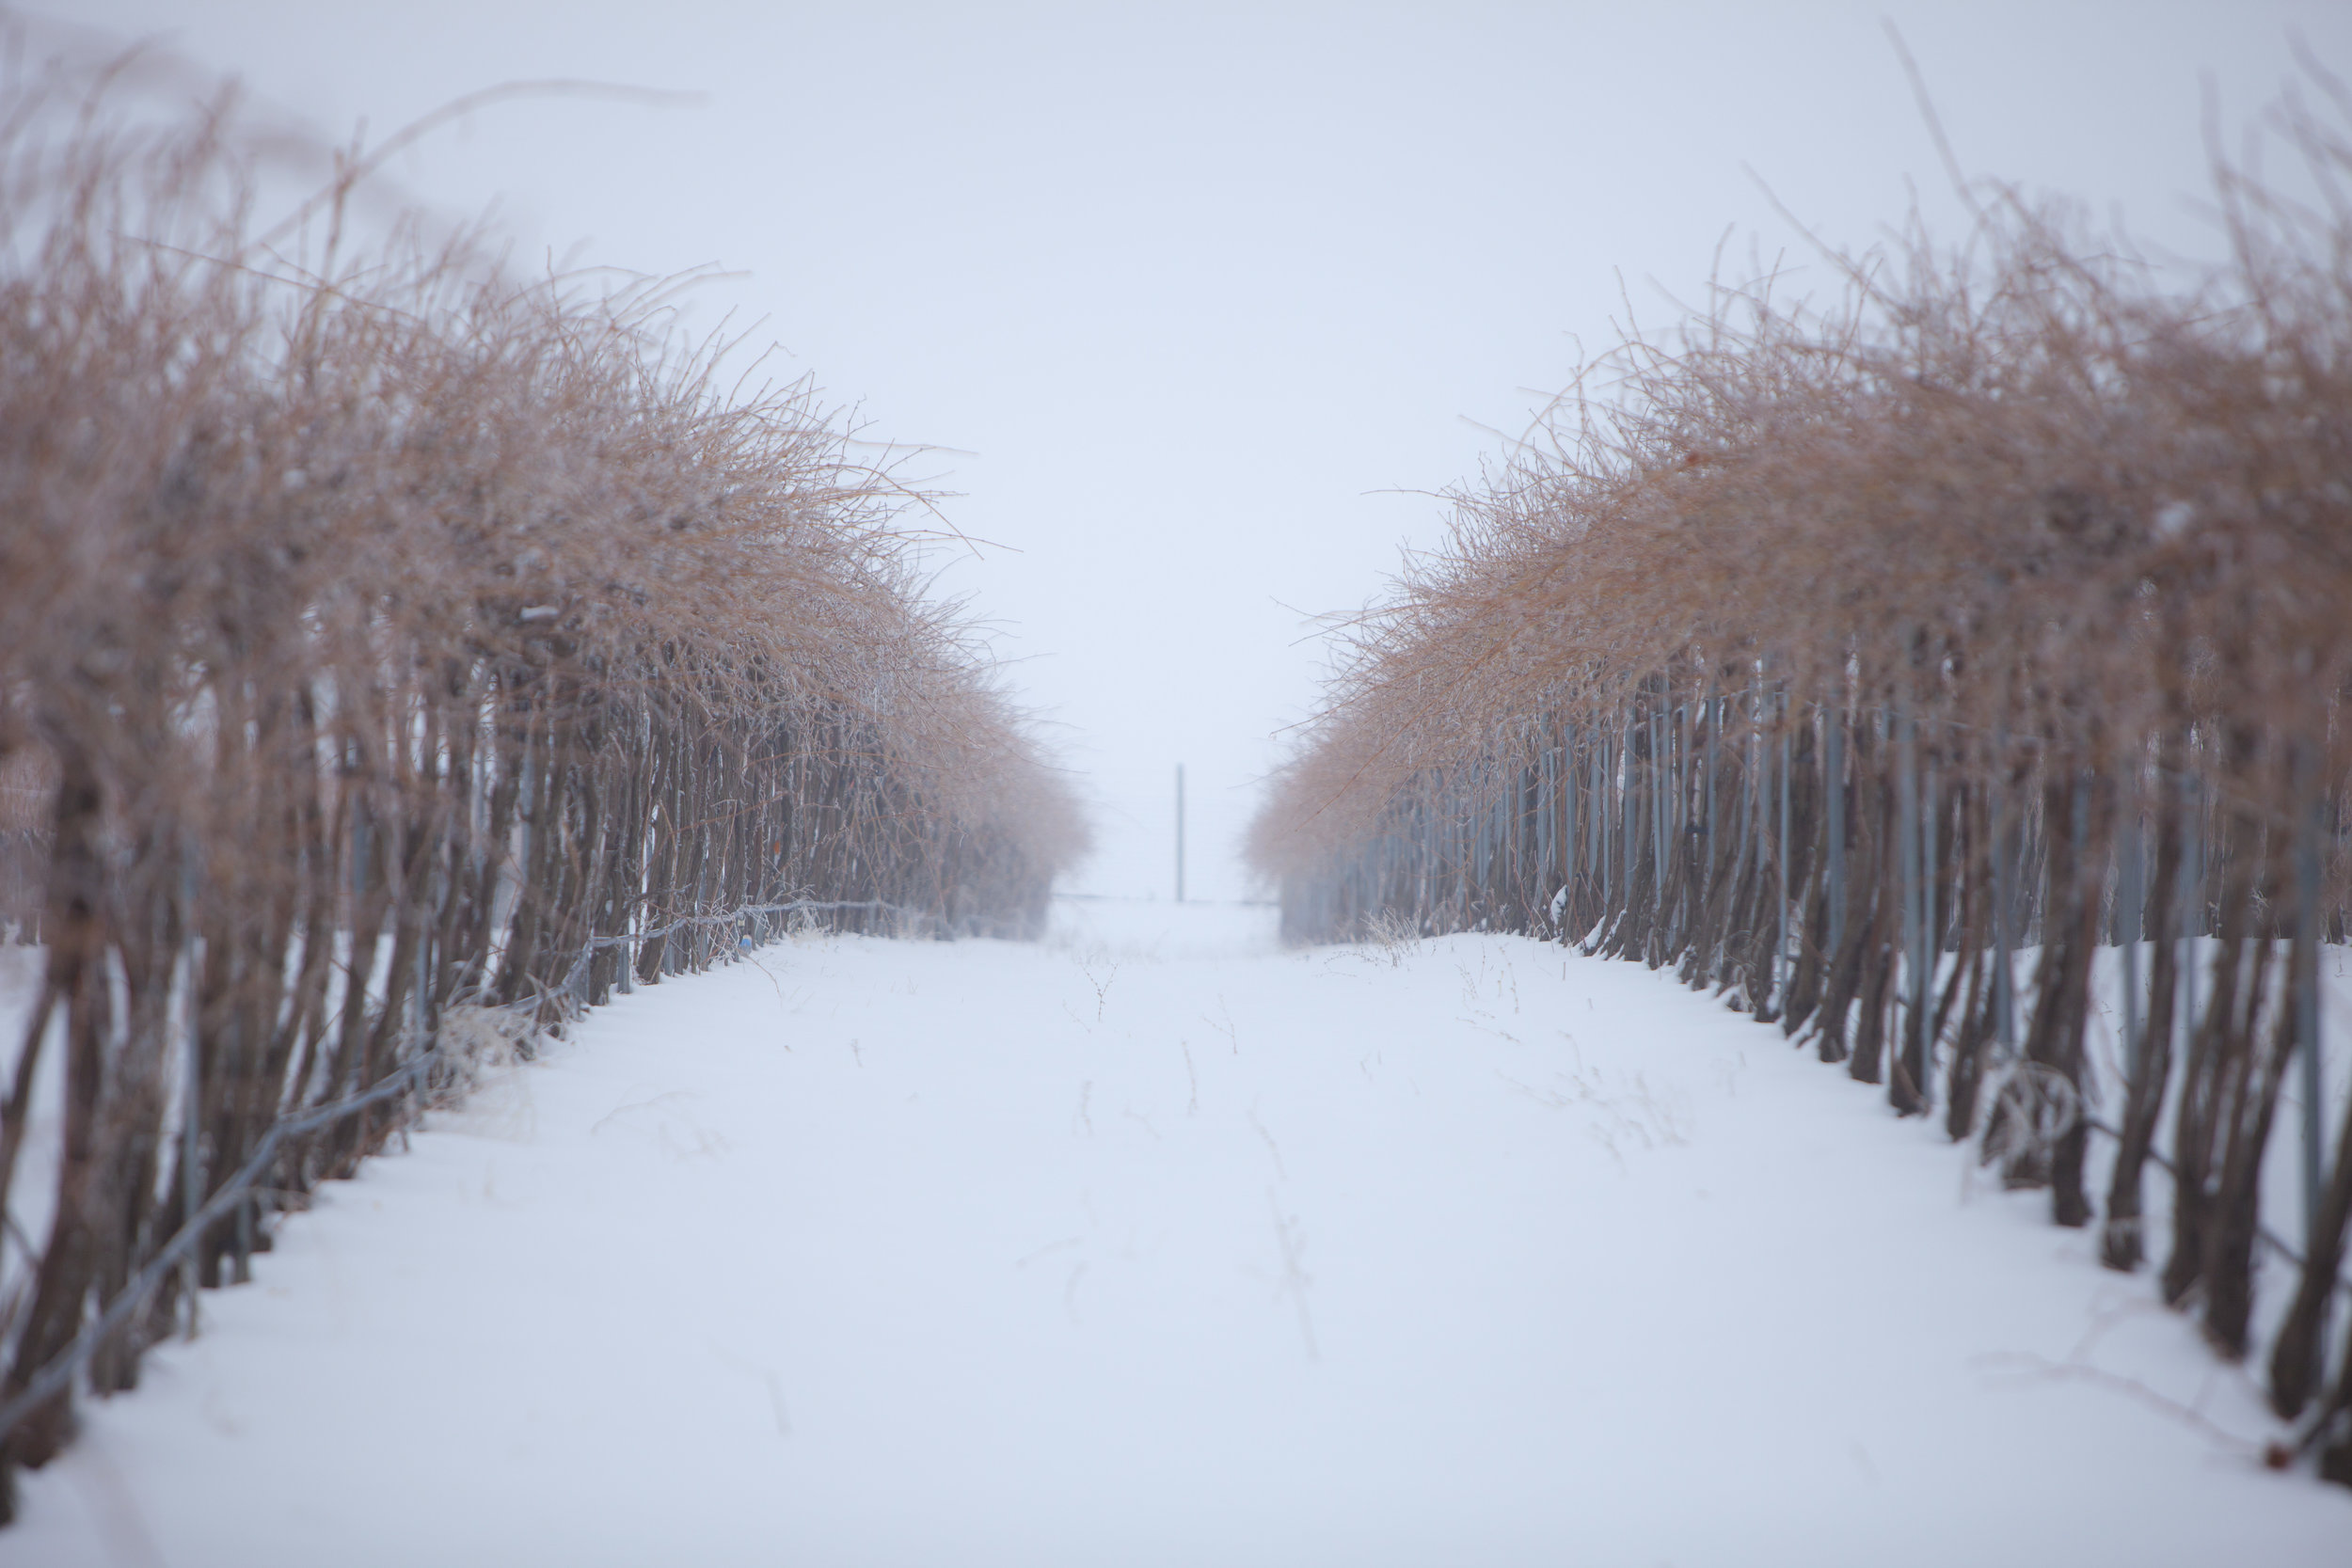 Les Collines Vineyard with a blanket of snow